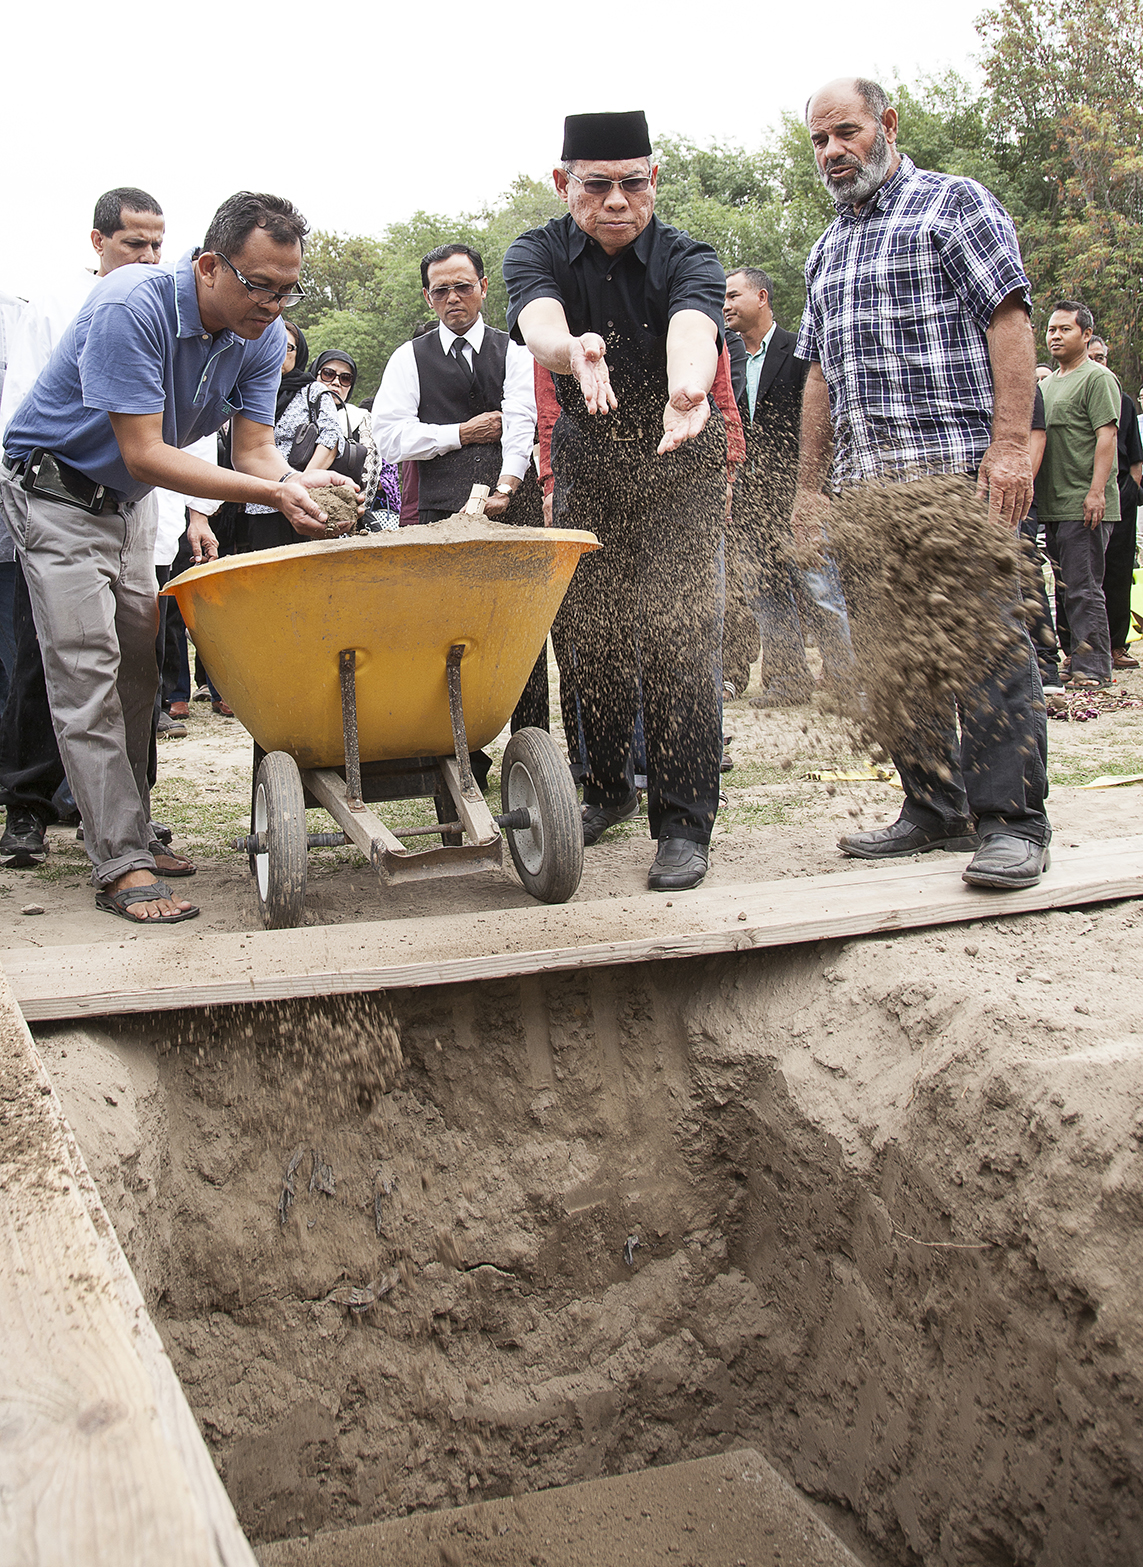  Mourners ritually throw dirt over my father's grave three times as they recite prayers during my father's funeral in Garden Grove, Calif. on&nbsp;Saturday, June 27, 2015 